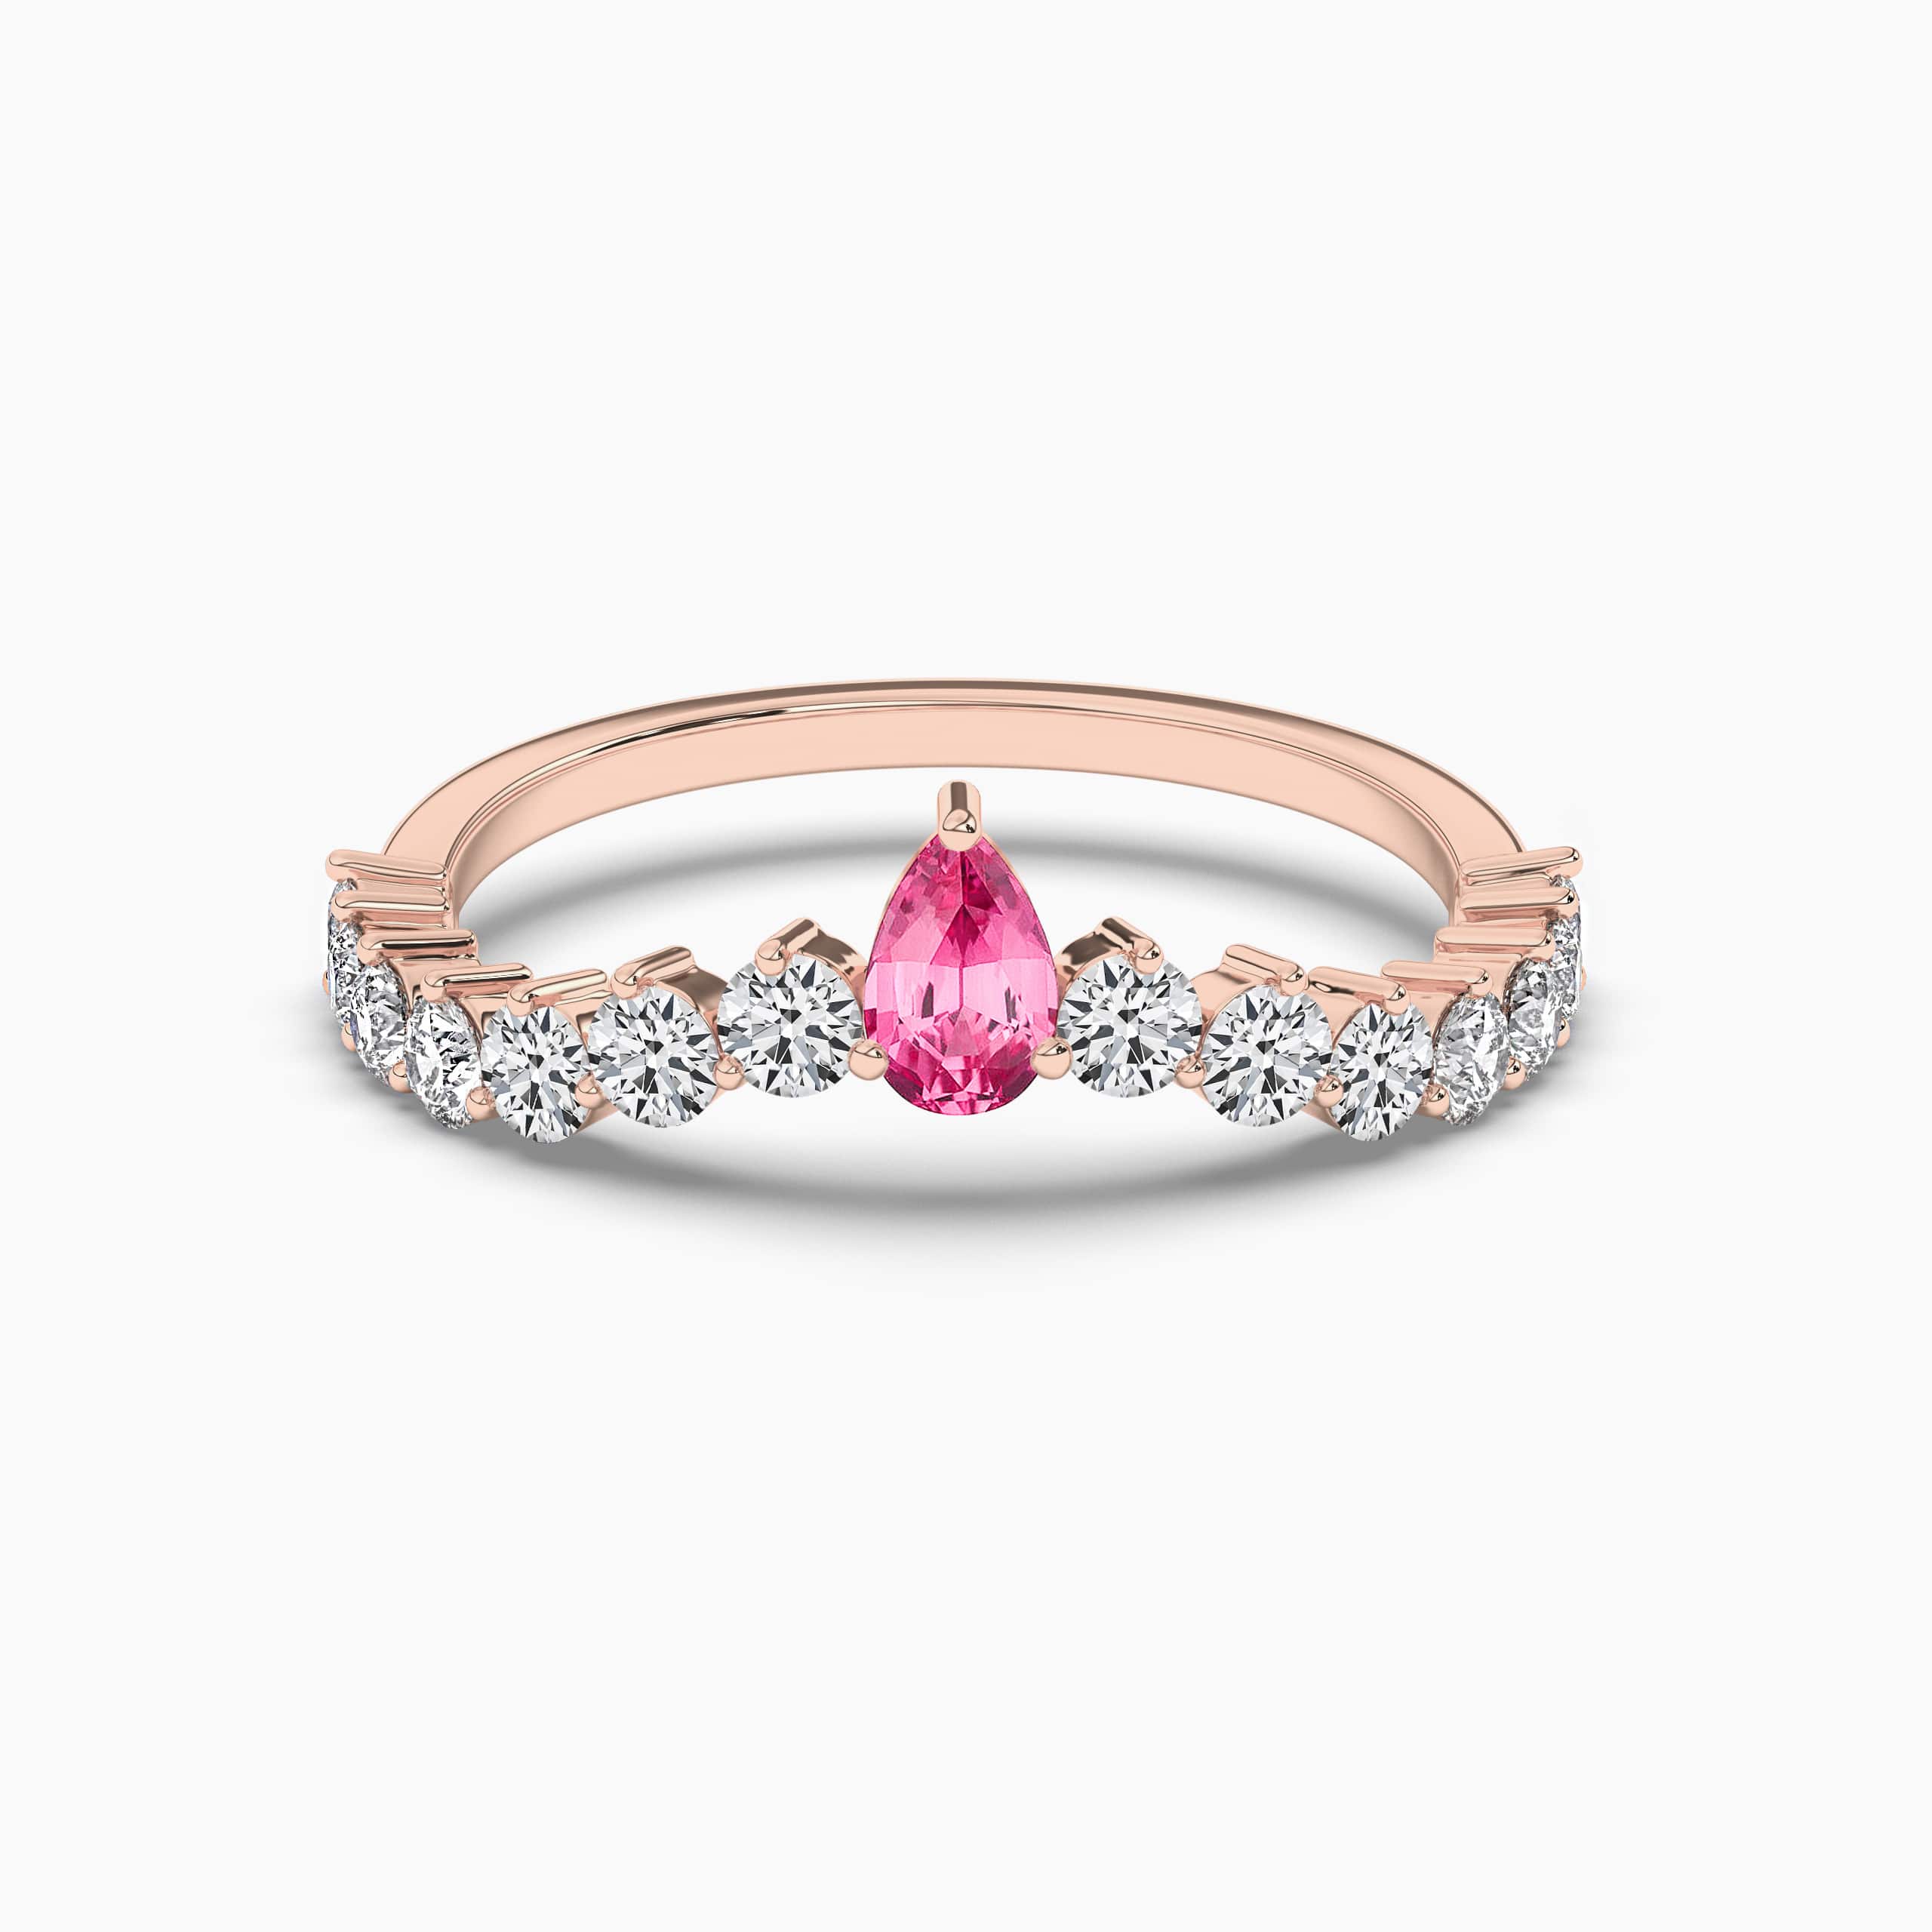 Pear Cut Pink Tourmaline & Diamond Curved Ring in rose gold